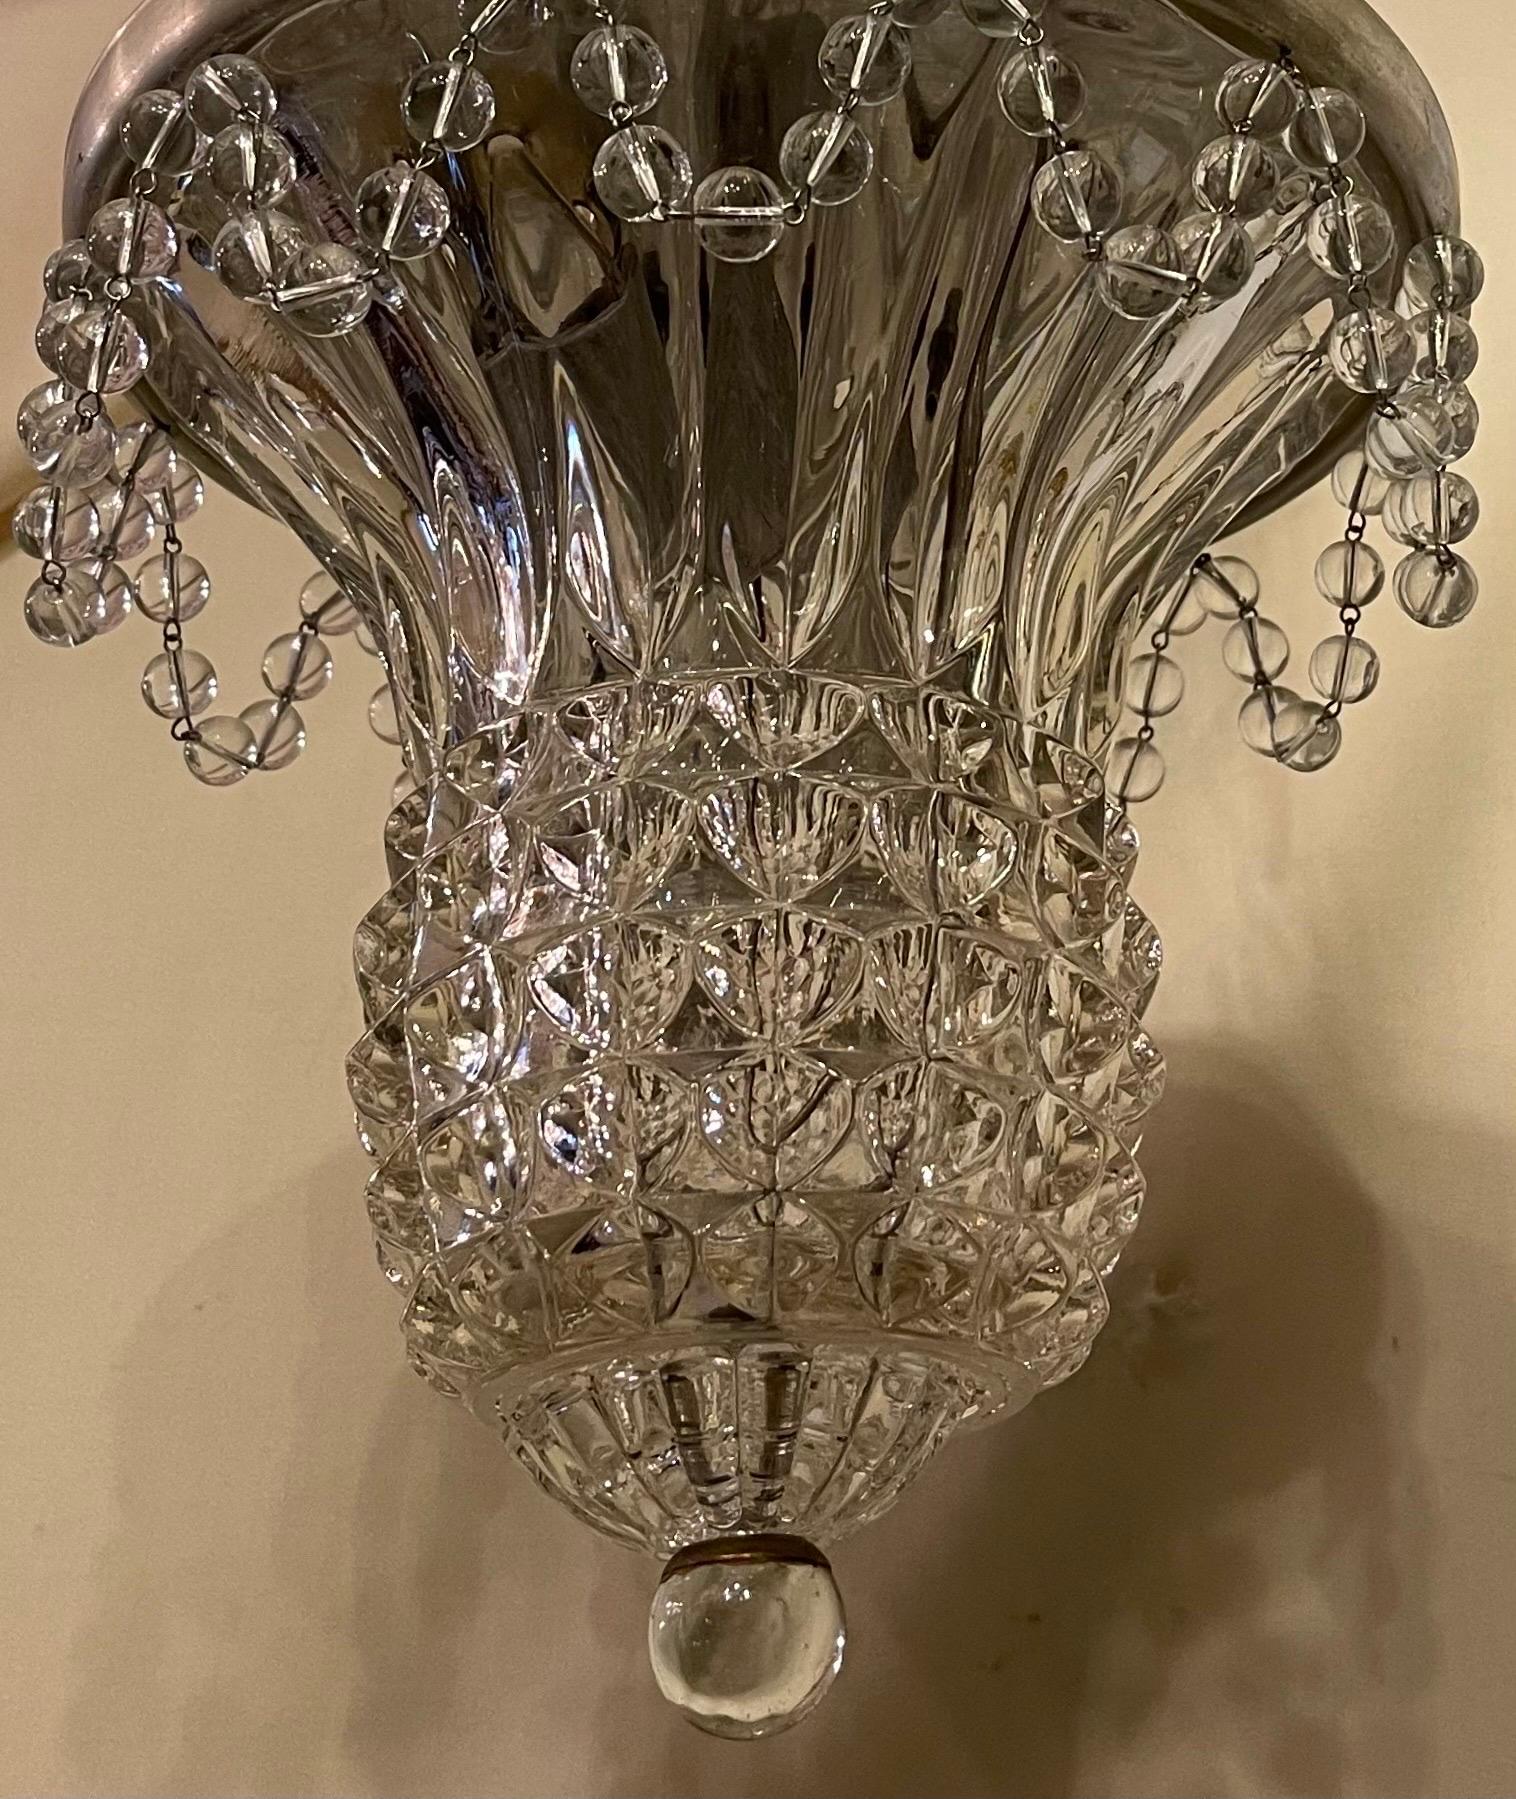 Faceted Wonderful Cut Crystal Dome Beaded Petite Flush Mount Ceiling Light Fixture   For Sale